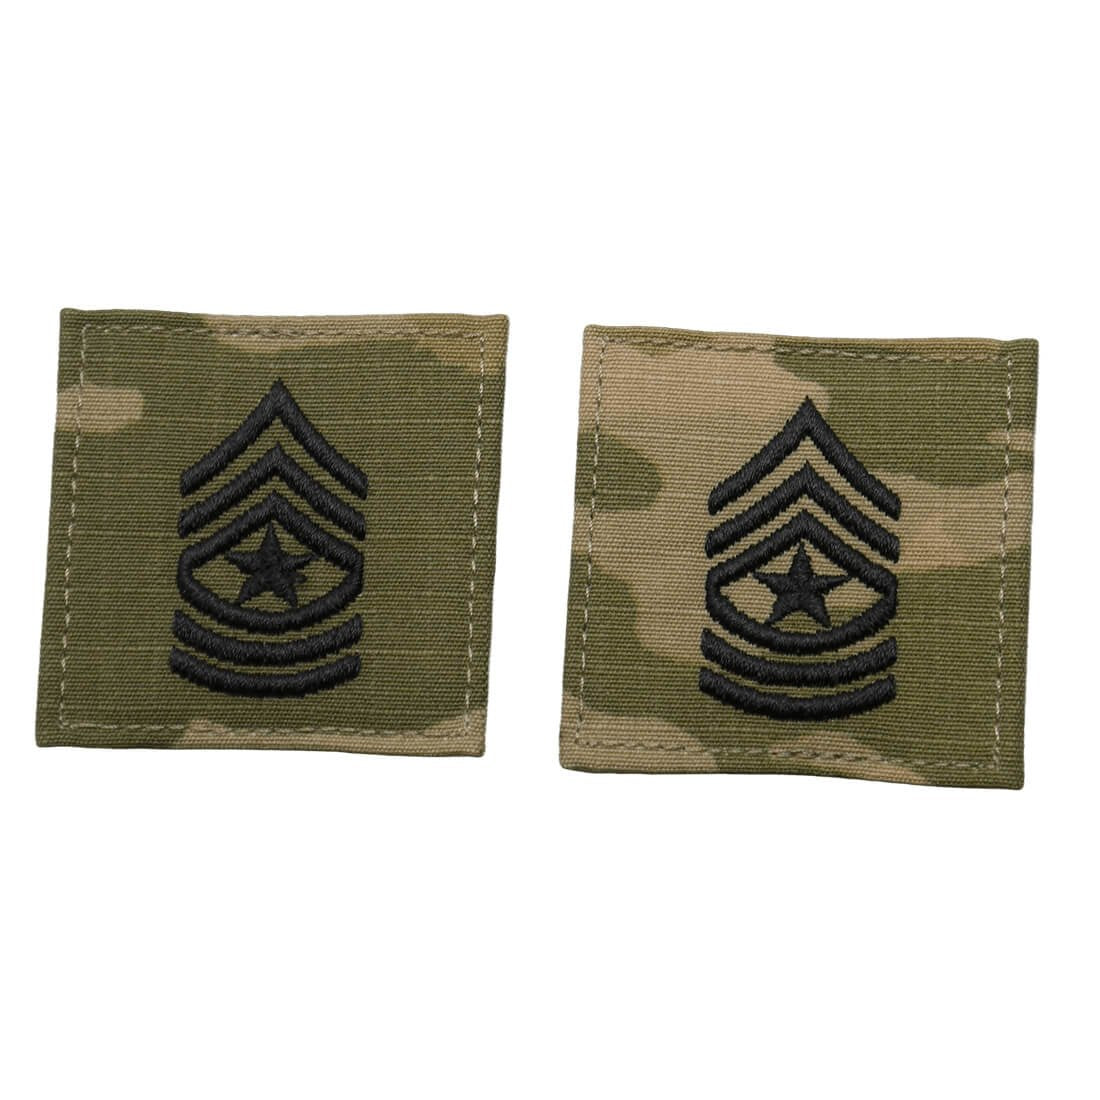 SGM Sergeant Major Army Rank OCP Patch With Hook and Loop Pair